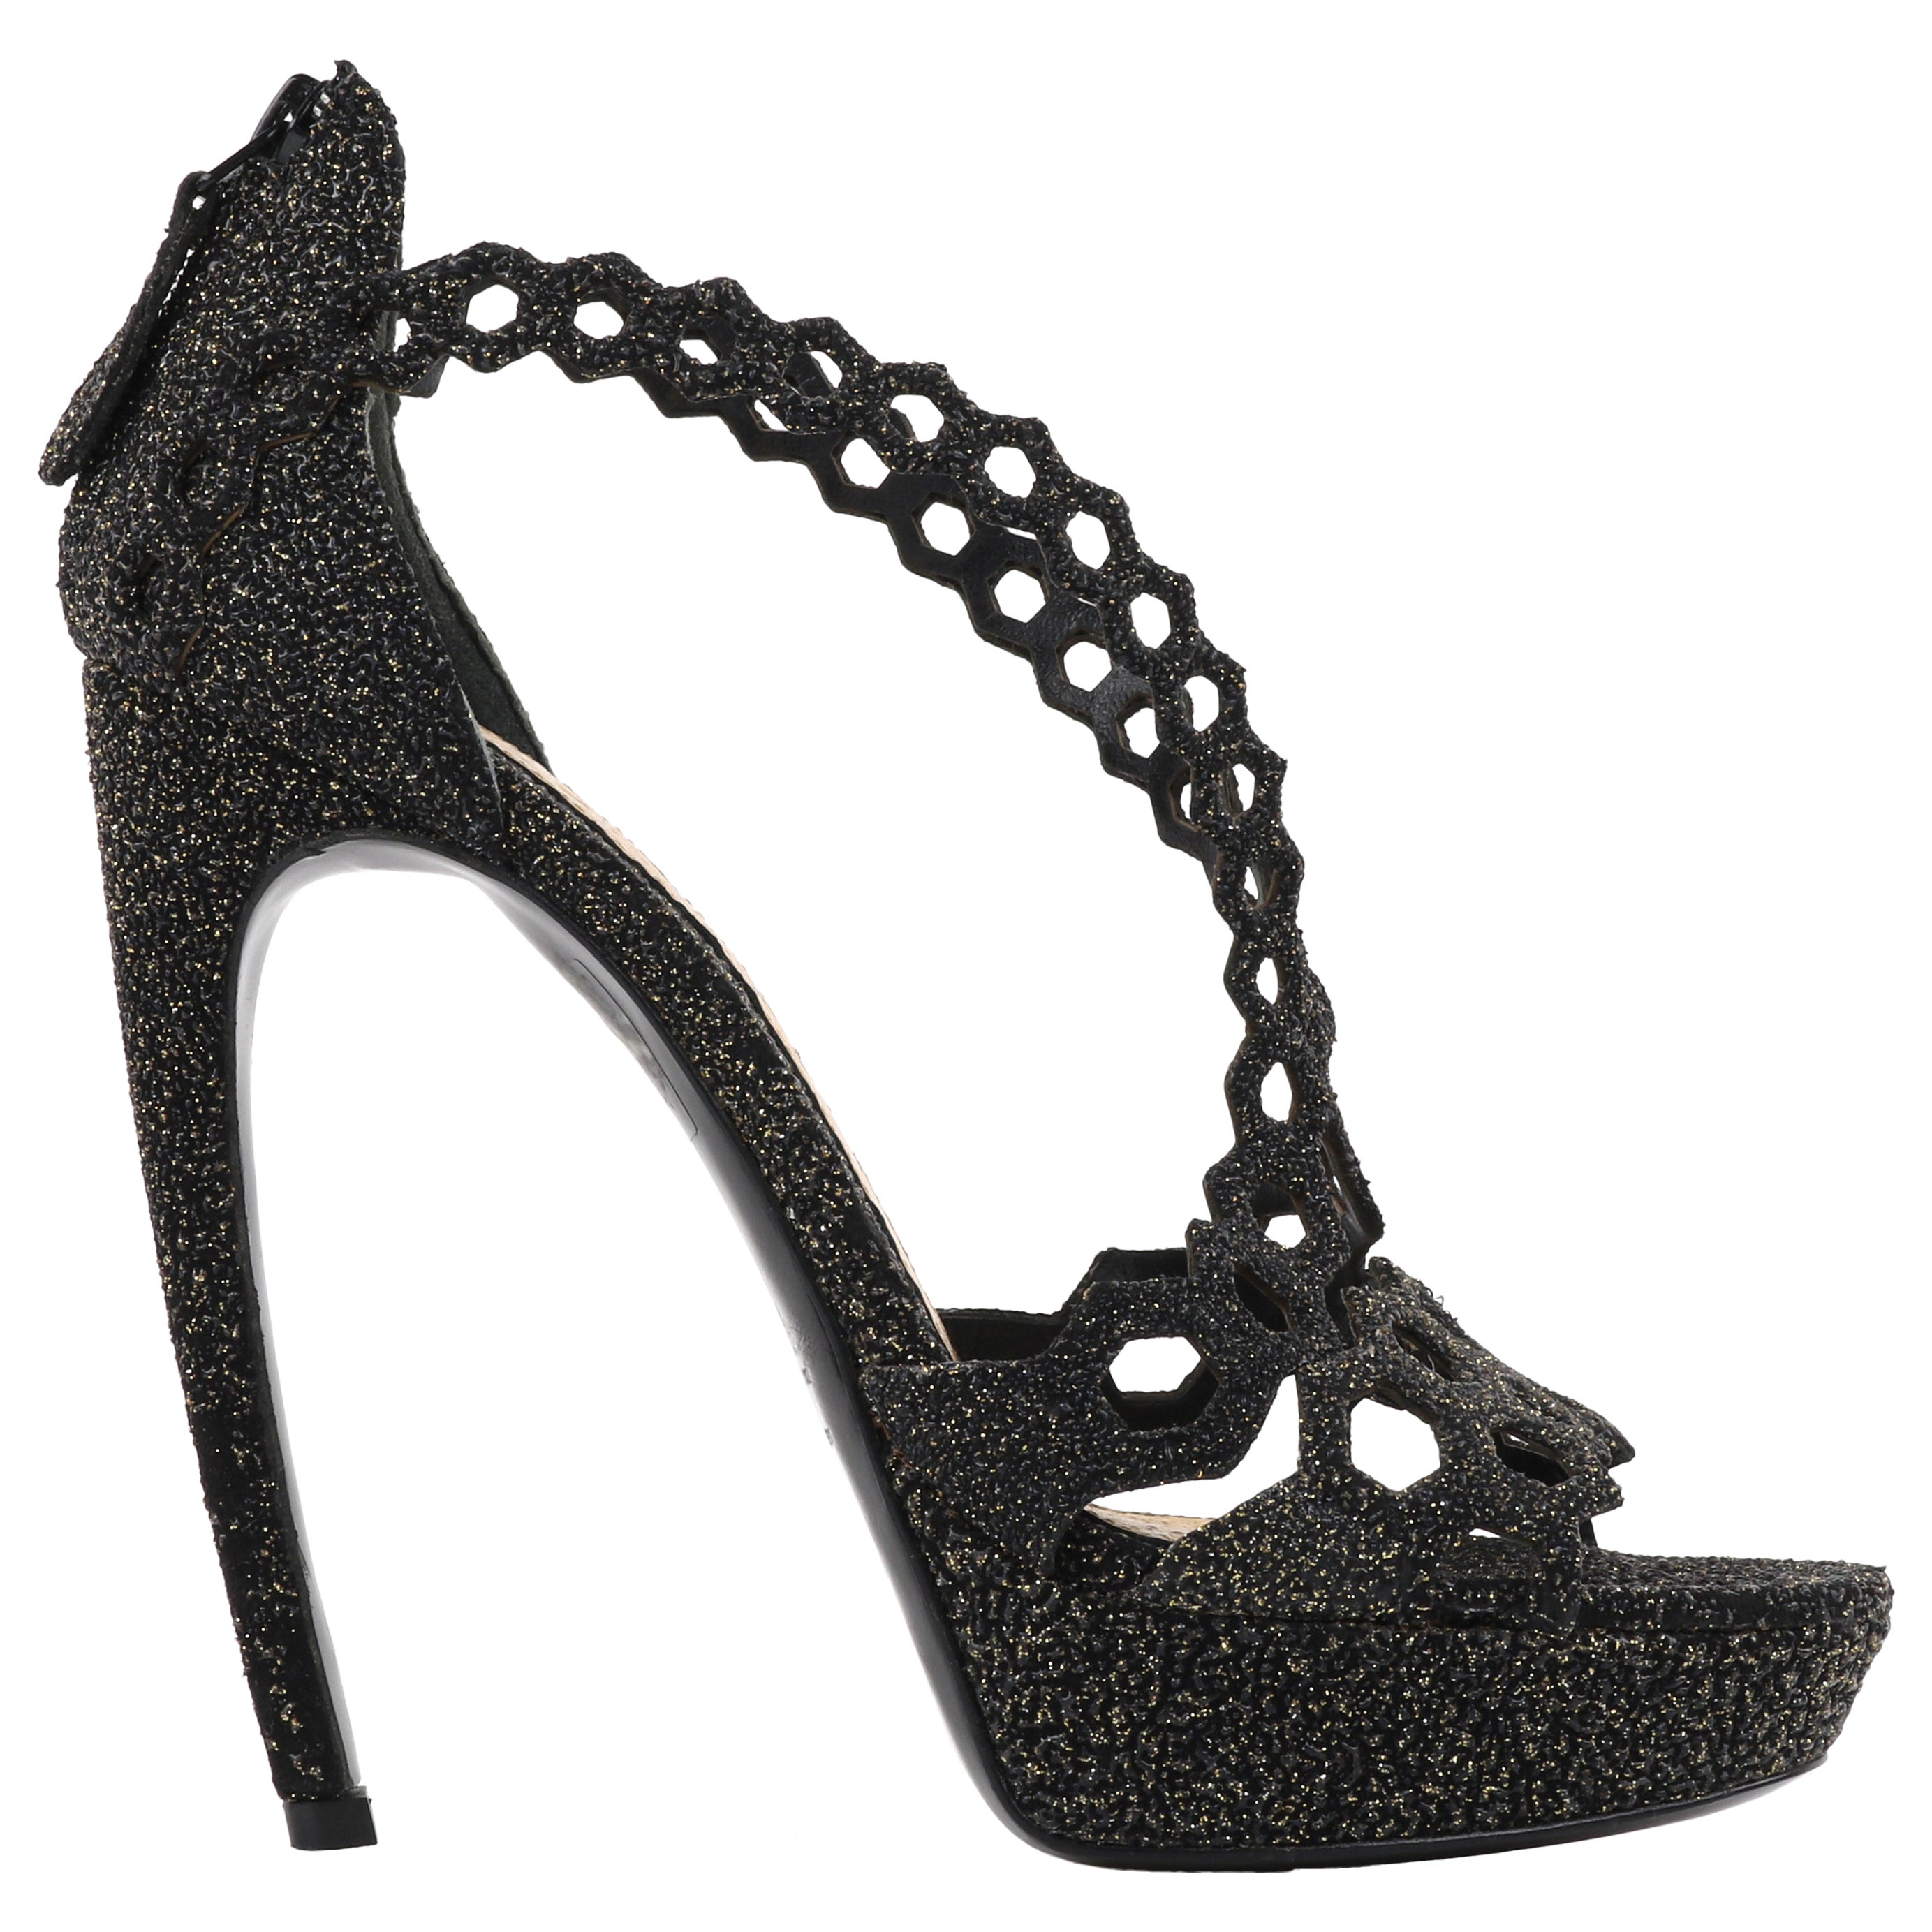 ALEXANDER McQUEEN S/S 2013 Black Gold Sparkle Honeycomb Textured Arched Heels For Sale